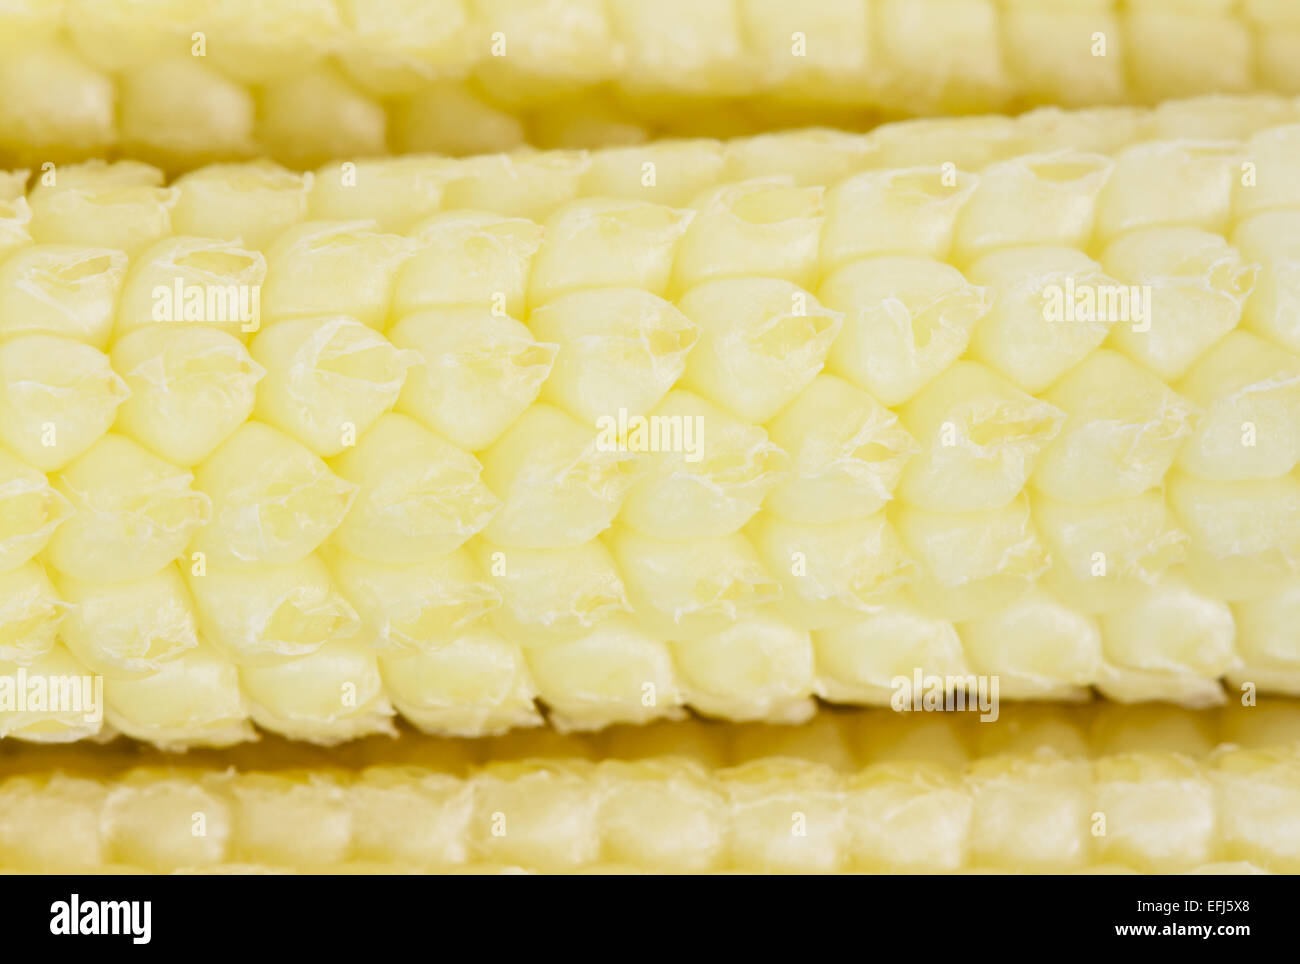 Macro image of baby corn ear (aka candle corn) revealing the tiny details of its kernels/grains. The image has a shallow DOF. Stock Photo